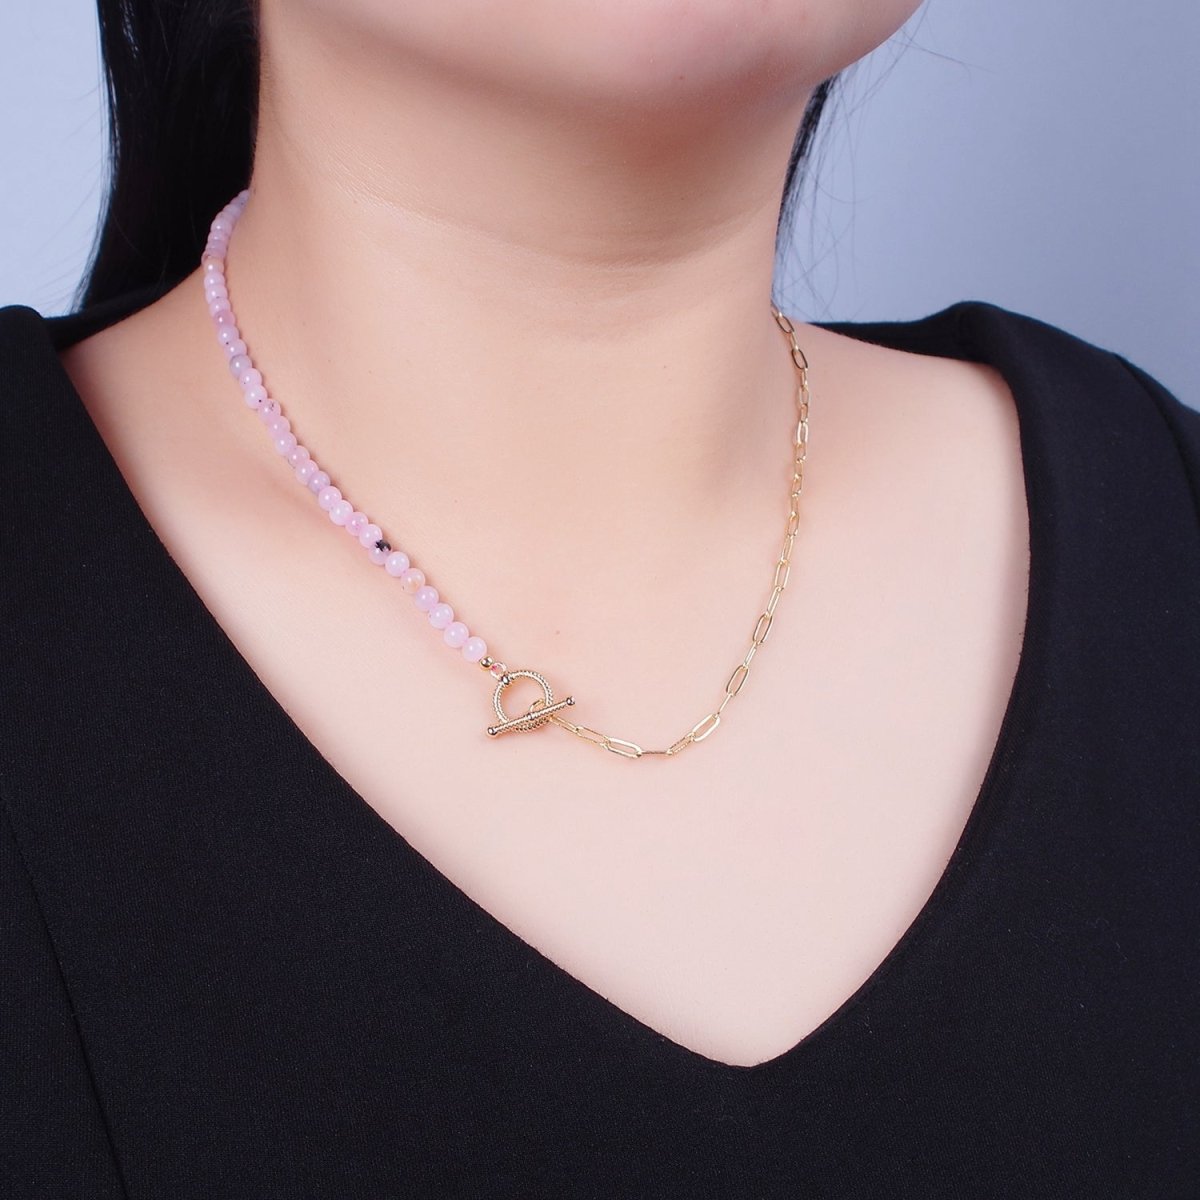 Dainty Half Bead Half Link Chain Necklace, 24k Gold Filled Paperclip Chain with Pink Jade Necklace Toggle Clasp | WA-970 Clearance Pricing - DLUXCA